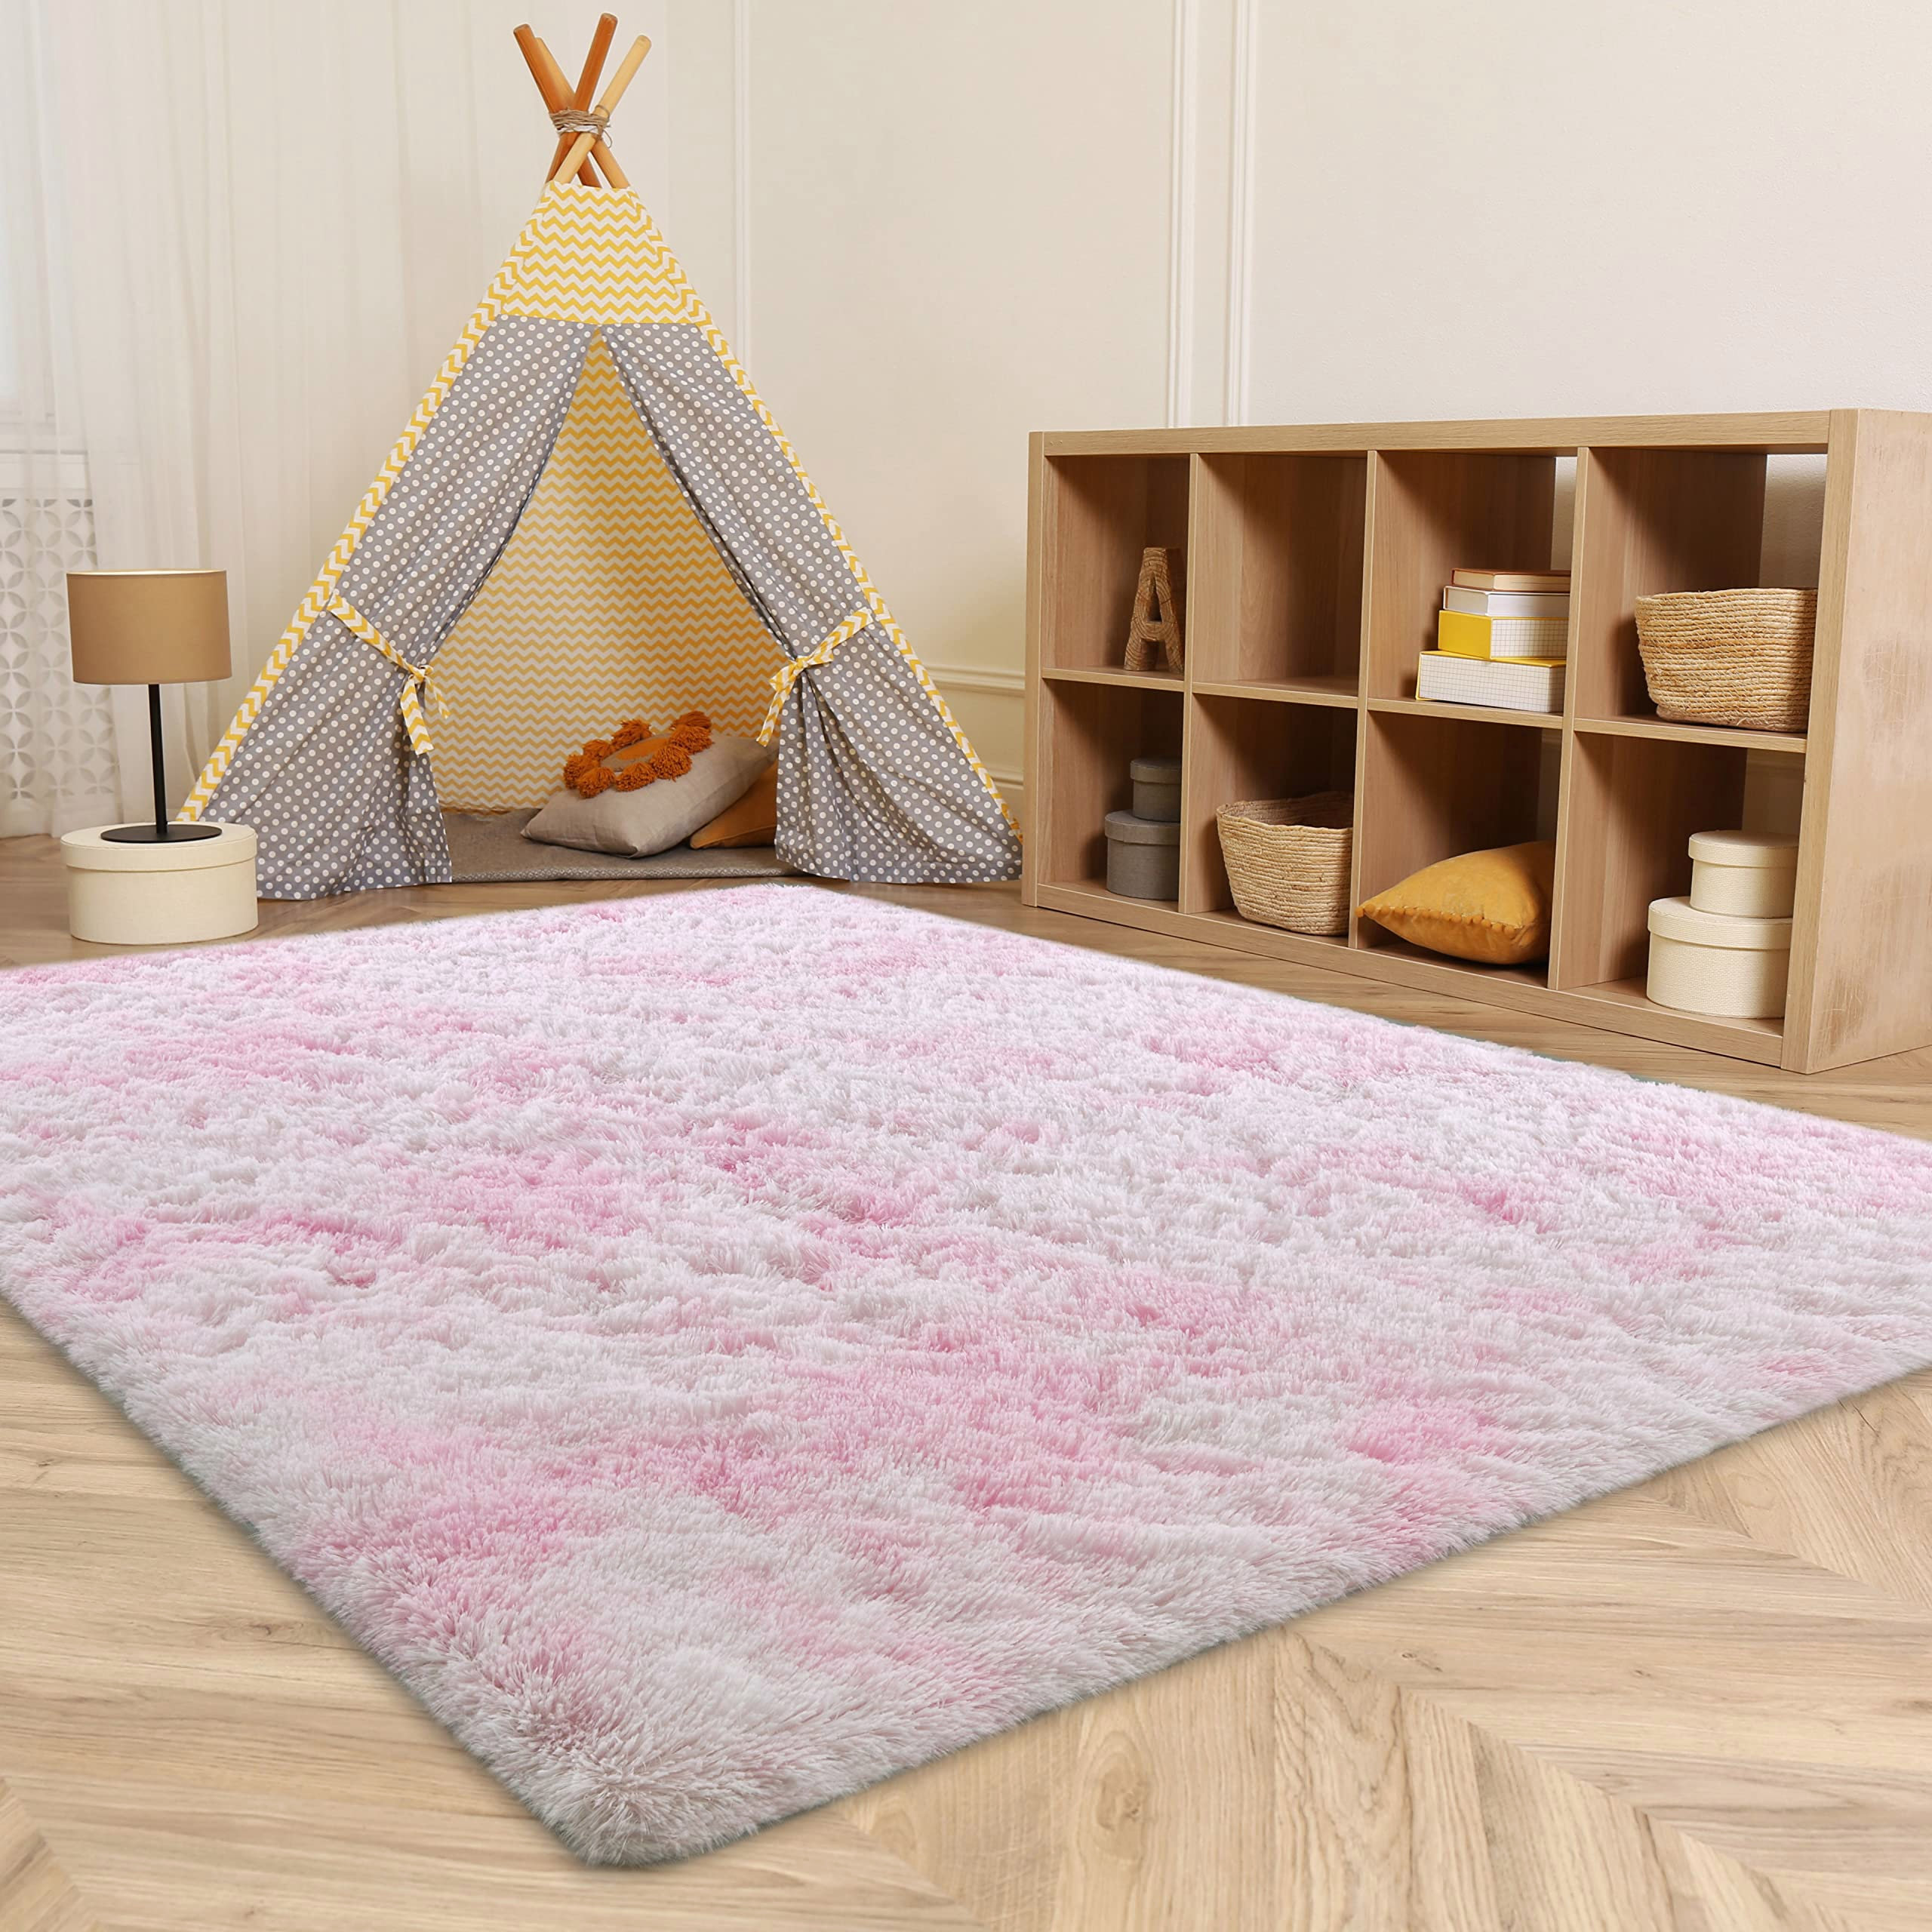 Fluffy 4'x6' Purple Rugs Plush Non-Skid Indoor Fuzzy Faux Fur Rugs Furry Accent Carpets for Living Room Bedroom Nursery Kids Playroom Decor GKLUCKIN Shag Ultra Soft Area Rug